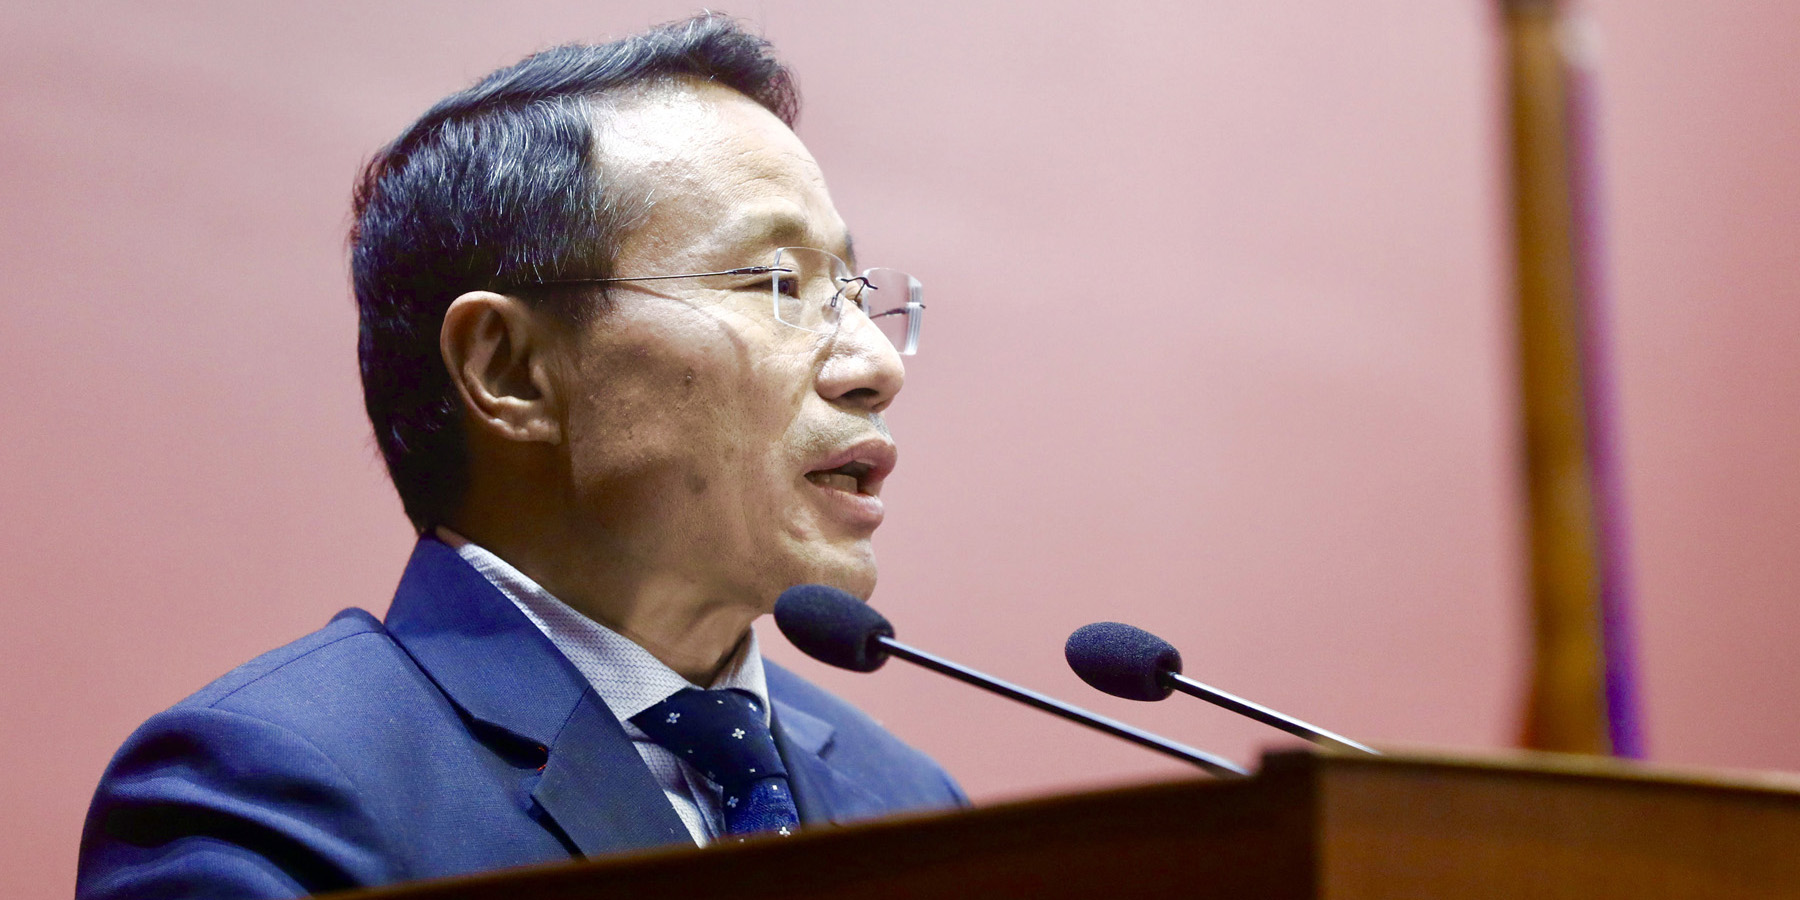 Govt will revise principles and priorities, says Finance Minister